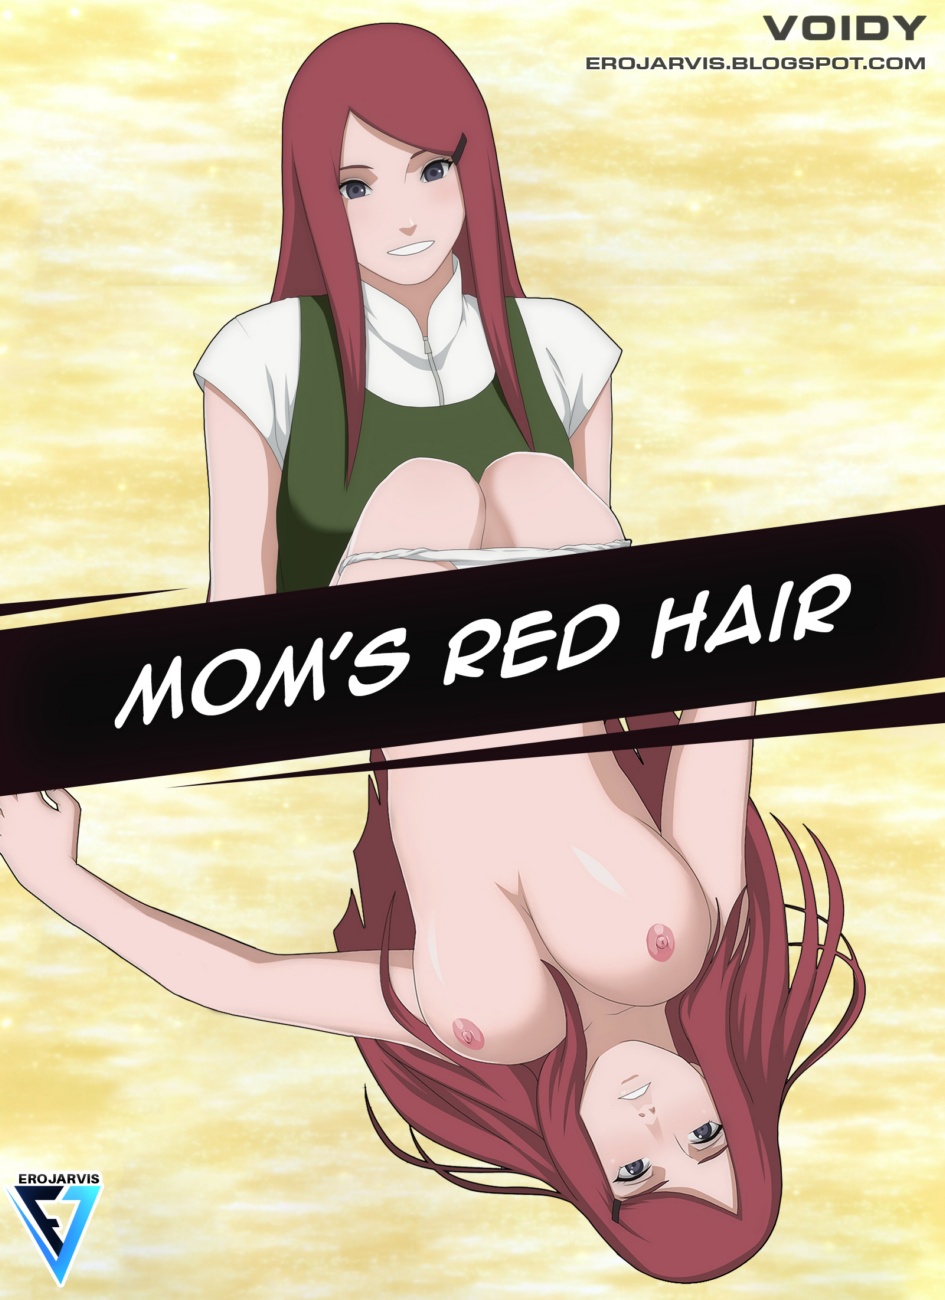 Red Hair - Erojarvis] - Mom's Red Hair (naruto) porn comic. Incest porn comics.